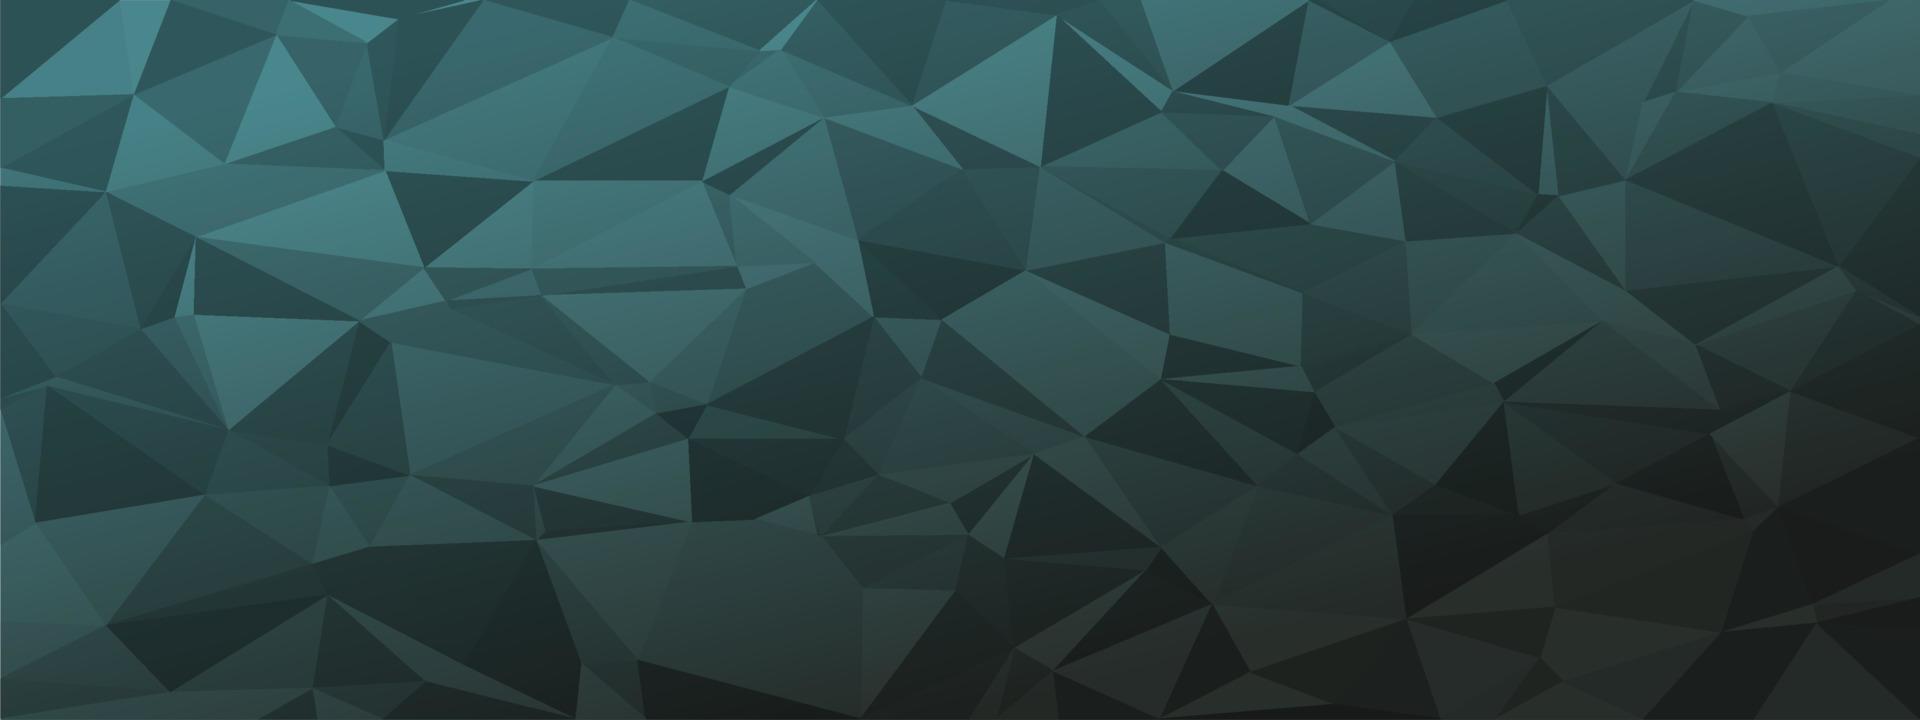 low poly abstract background. dark natural colors chaotic triangles of variable size and rotation. Minimalist layout for business card landing page wallpaper website brochure. Trendy vector eps10